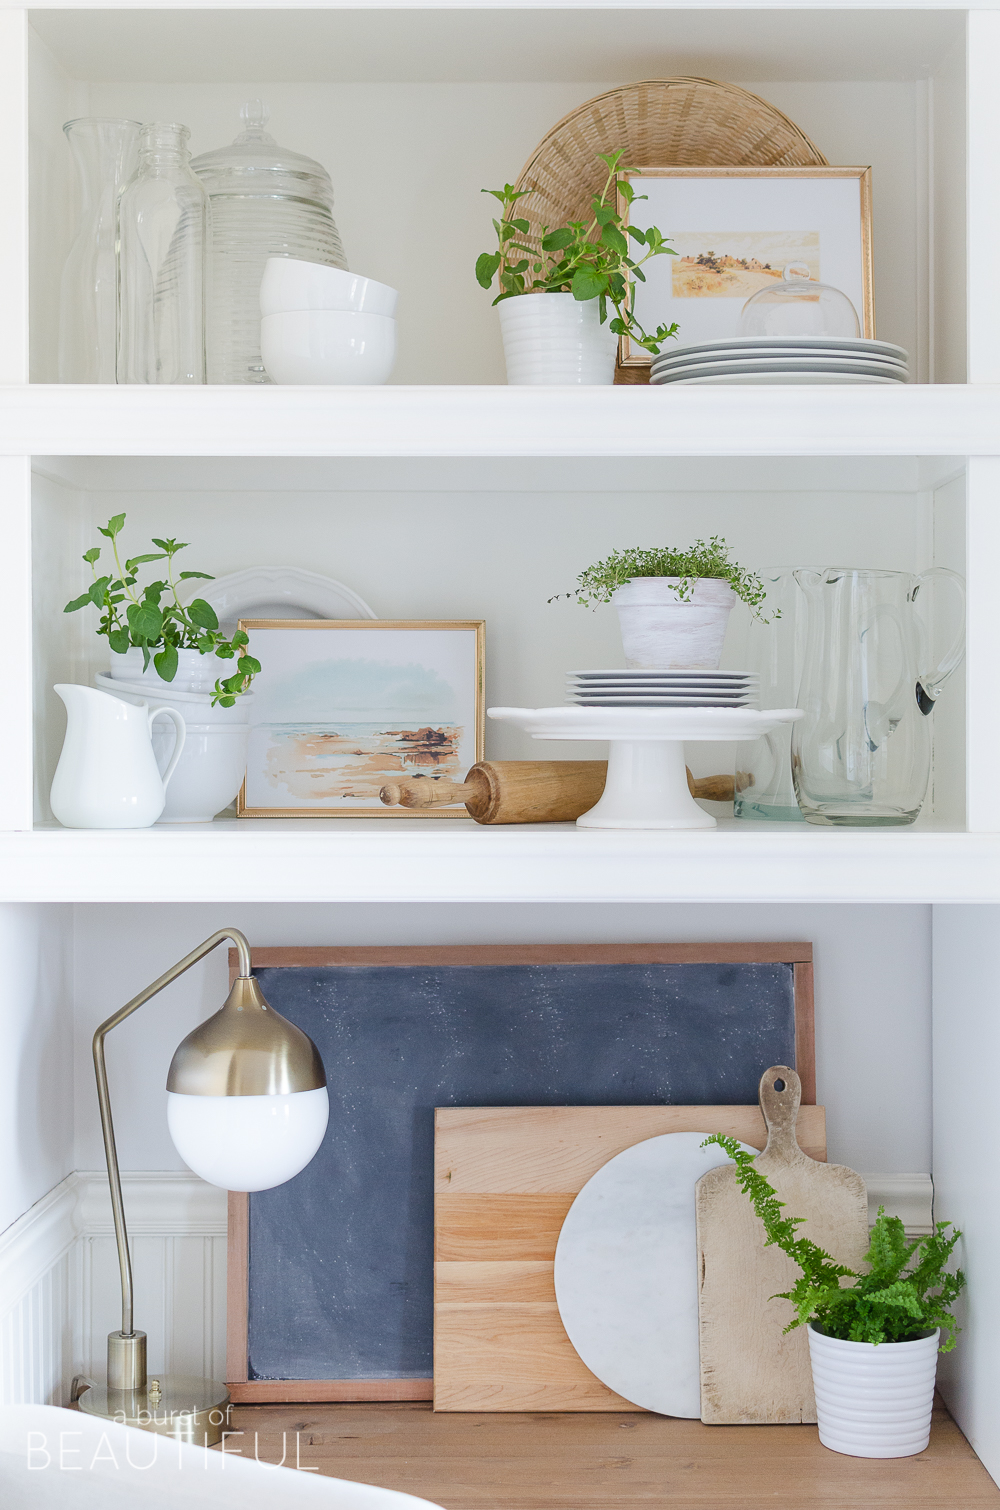 Learn how to style open shelving in the kitchen and create this effortless modern farmhouse look